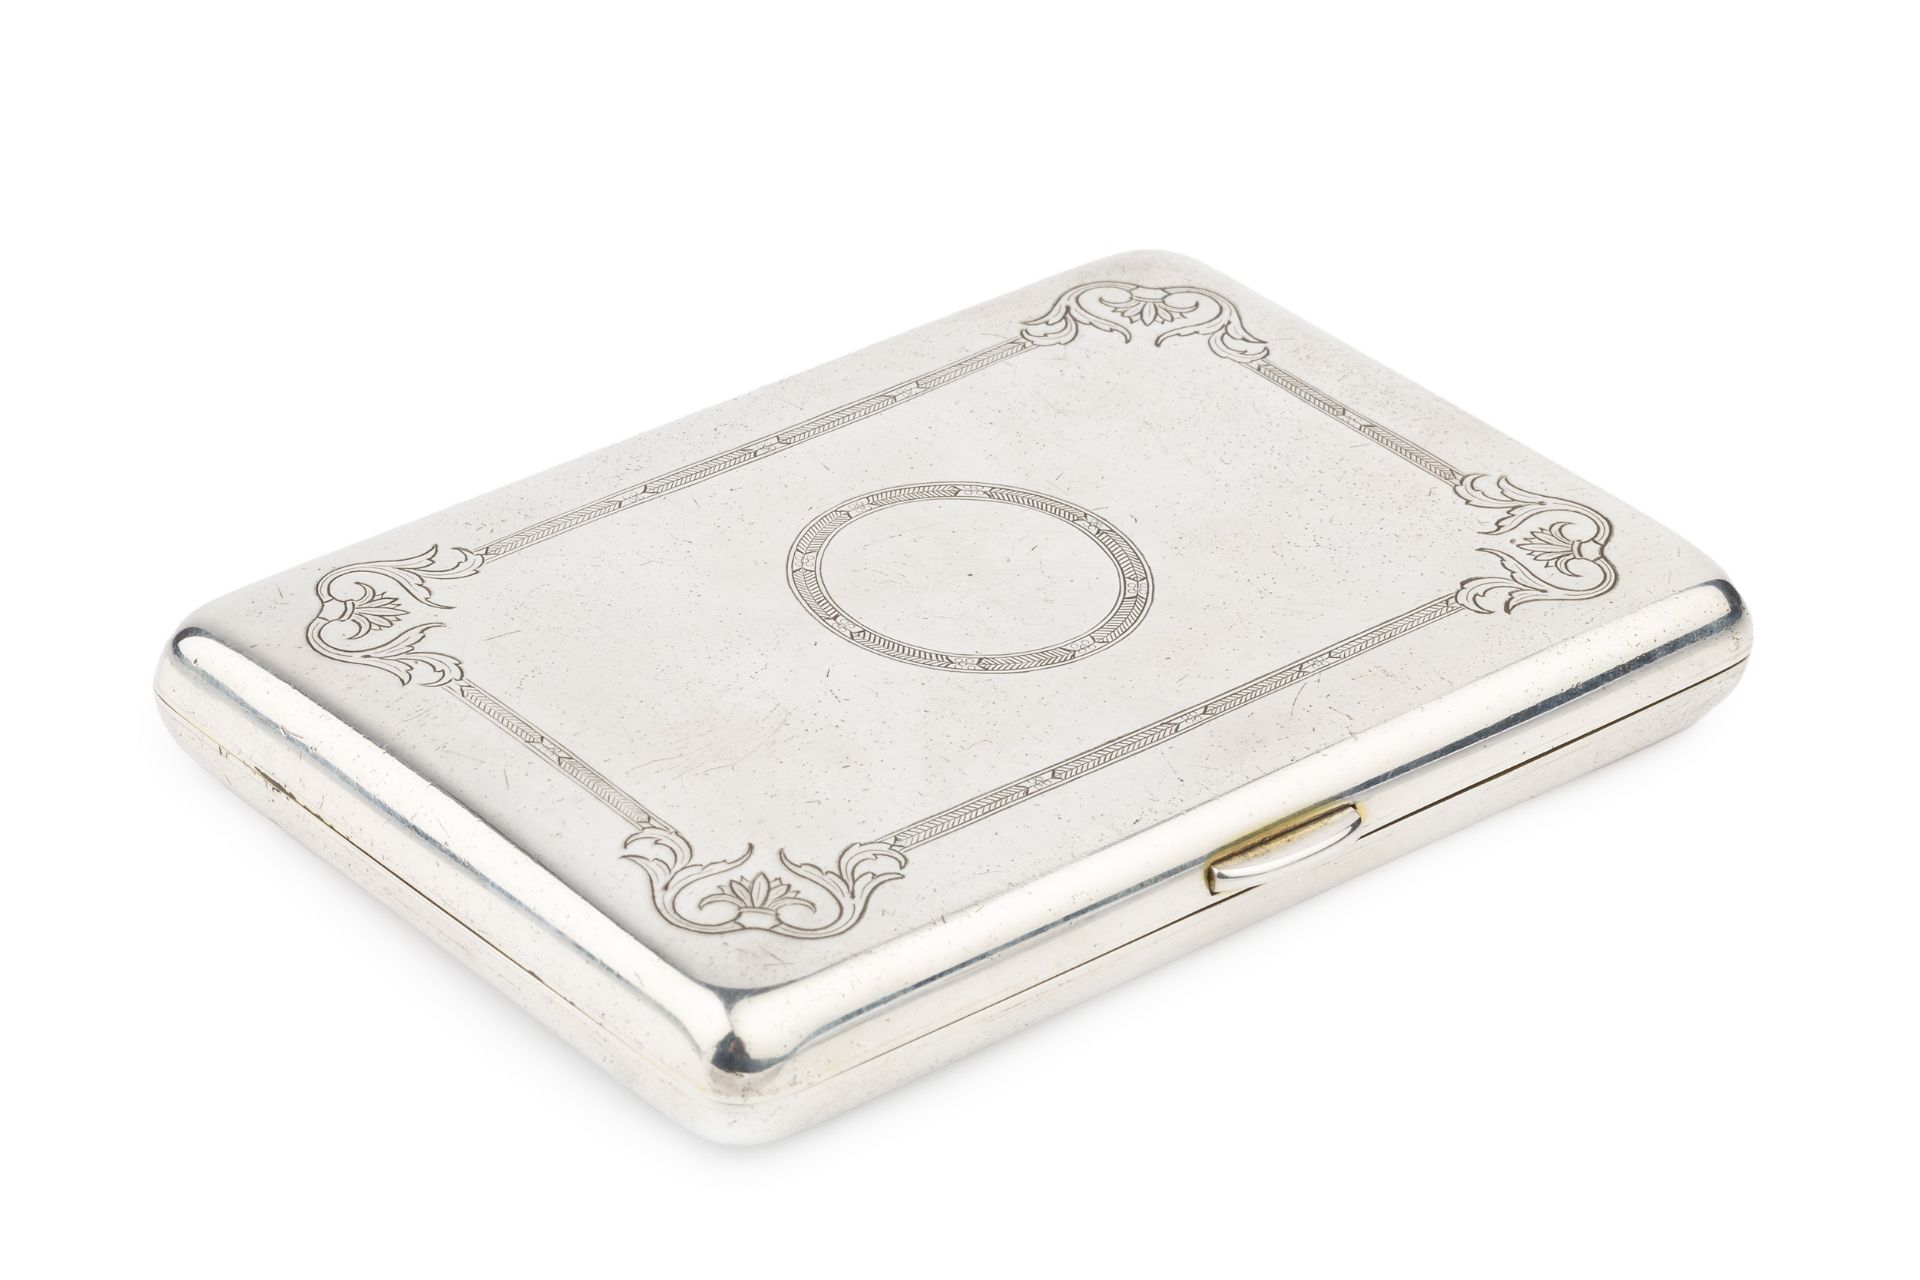 An Edwardian silver rectangular card case, with engraved decoration, rounded corners and sprung